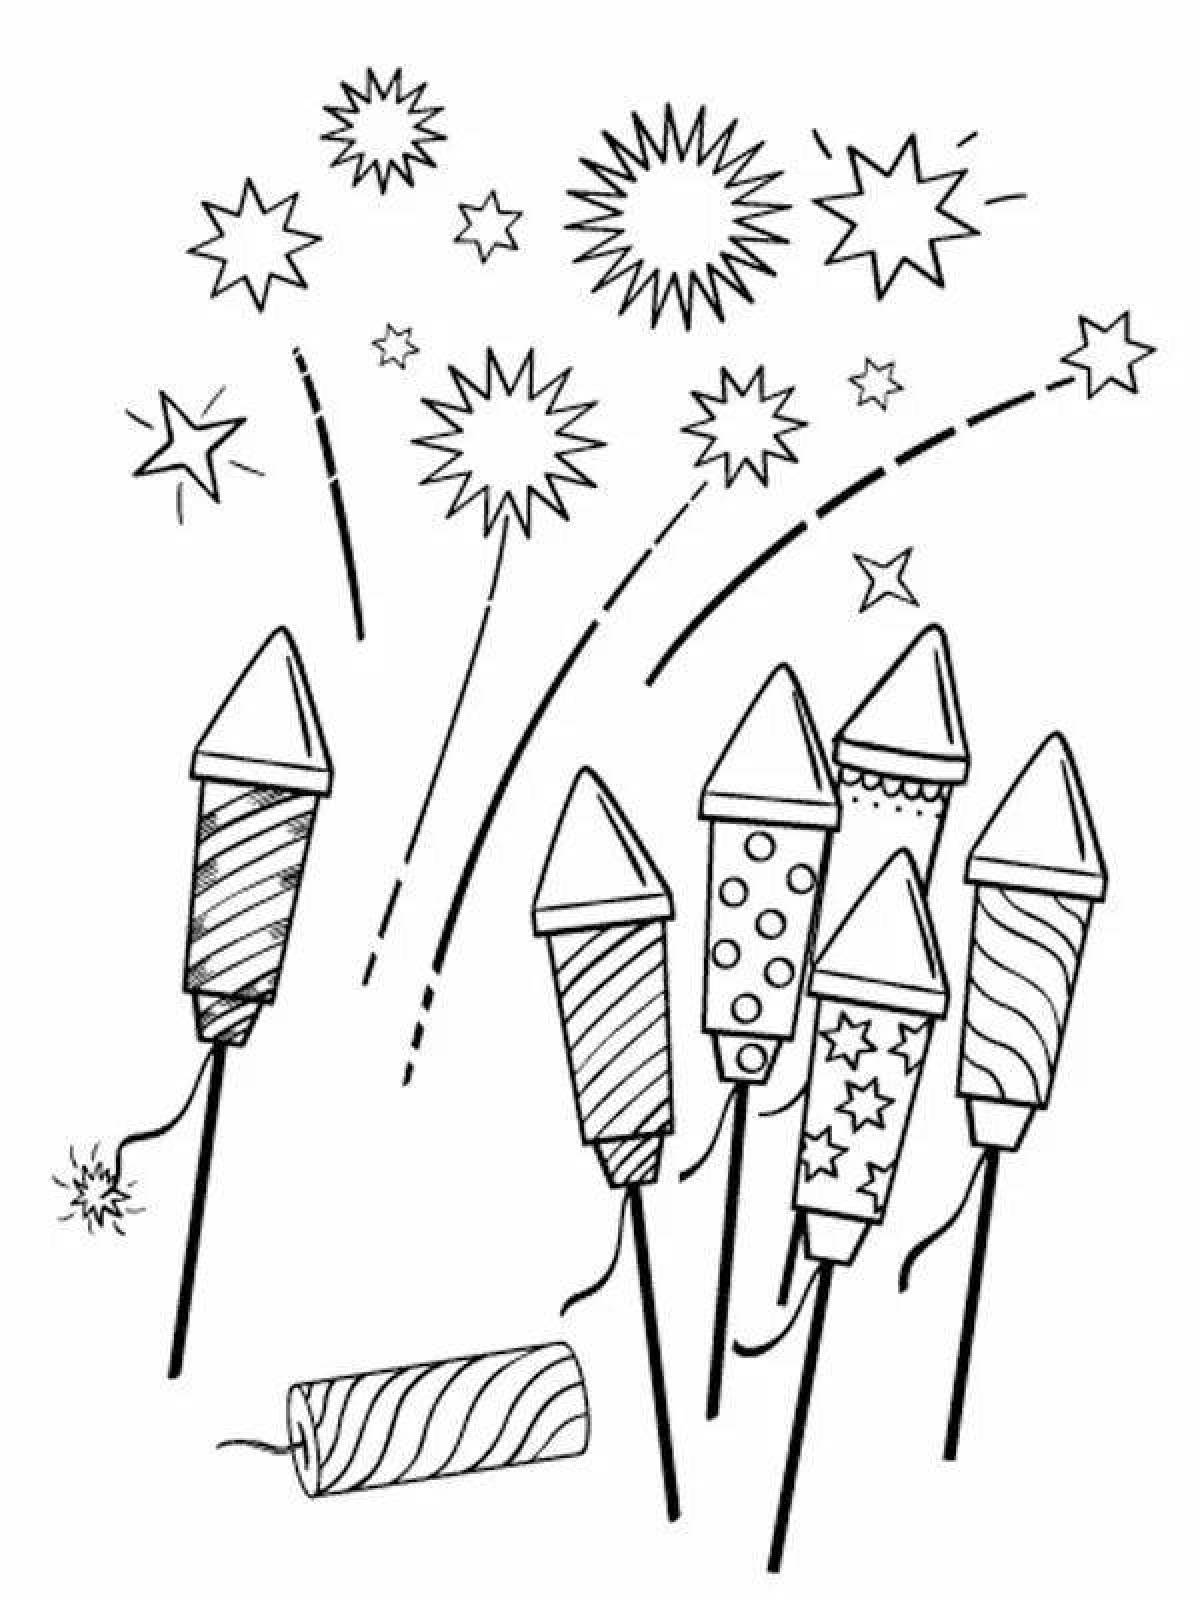 A fun fireworks coloring book for kids